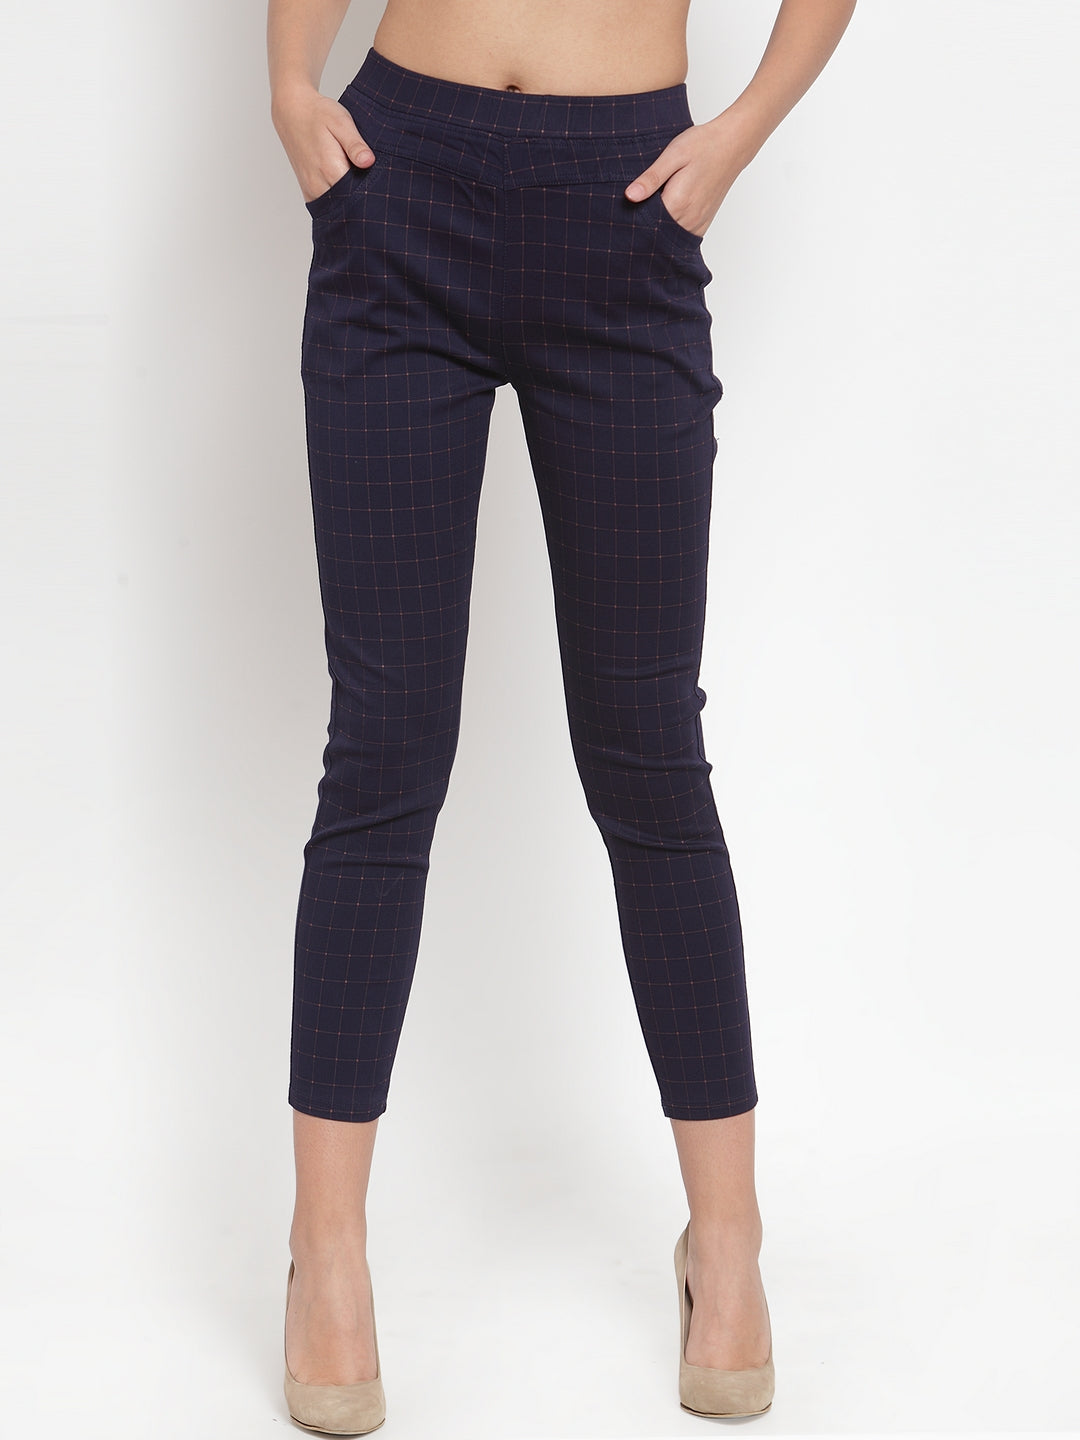 Women Navy Blue Ankle Length Checked Stretchable Jegging - Global Republic #